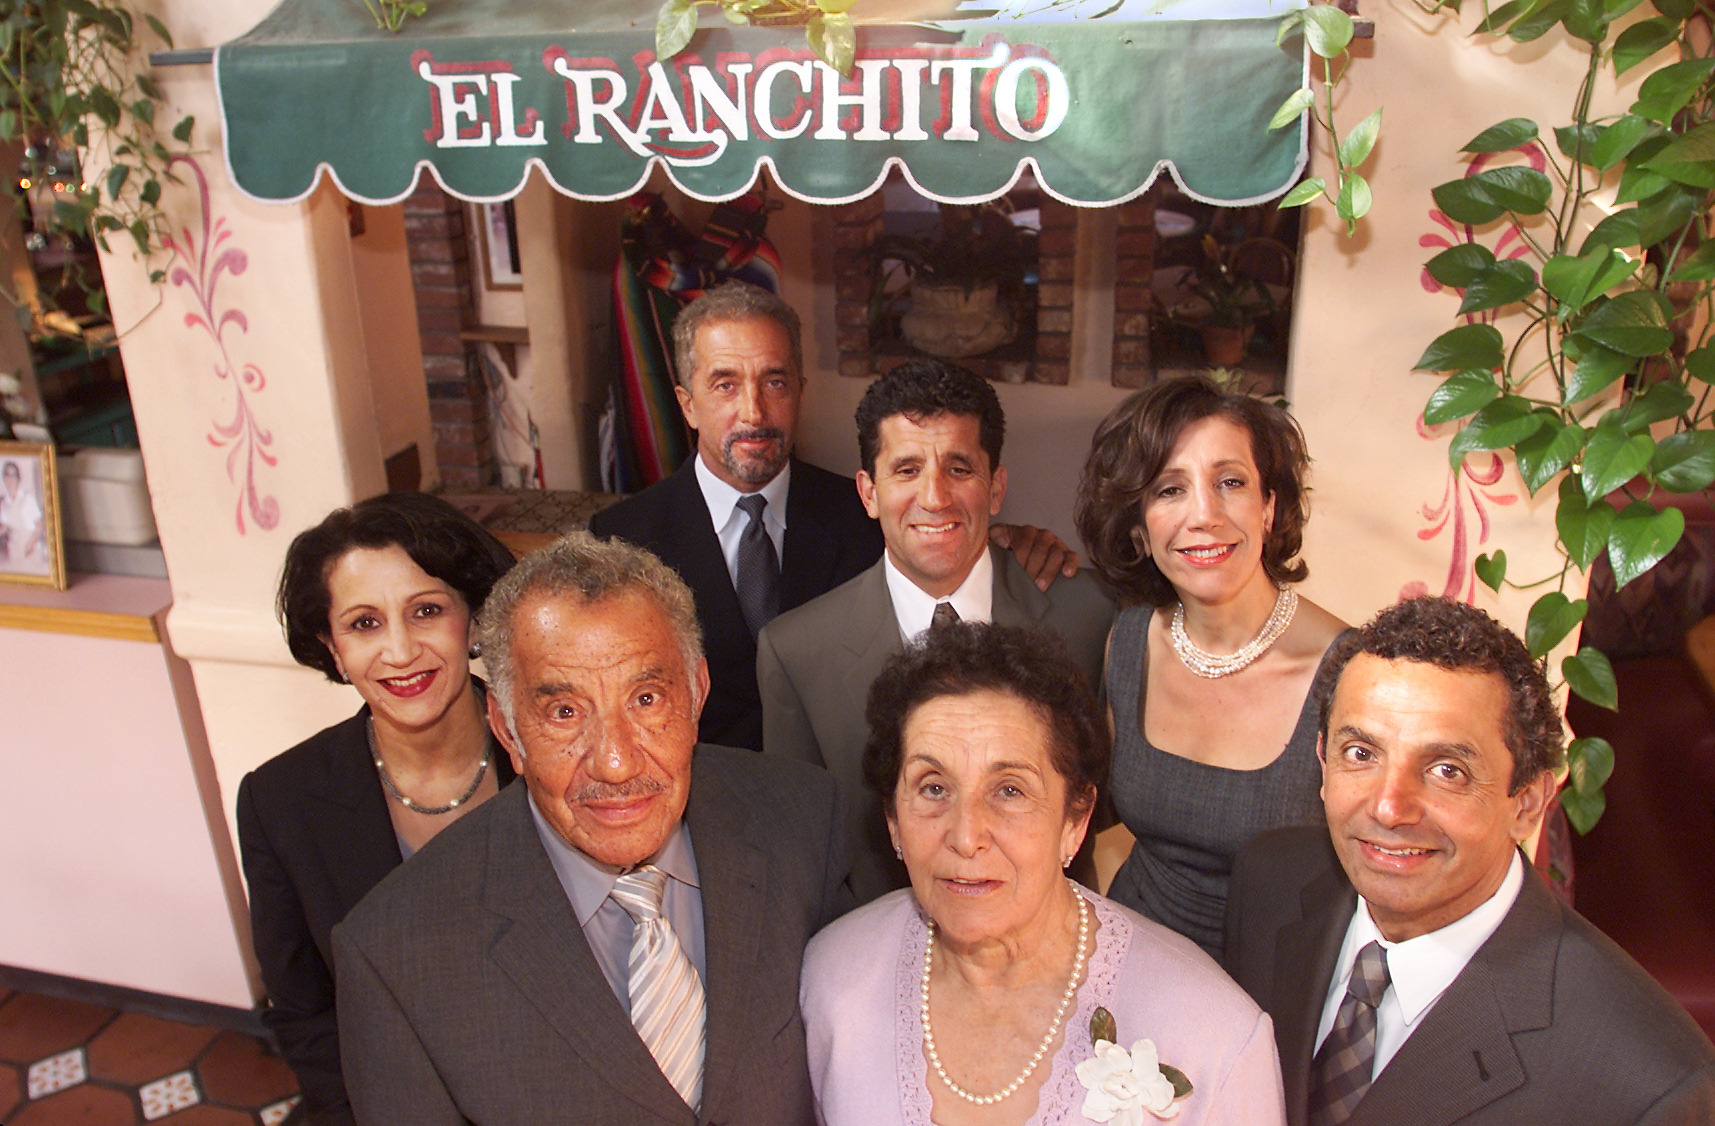 The Avila family, (clockwise from lower left) patriarch Salvador, his daughter Maria Elena, Salvador Jr., Victor, Margie, Sergio and wife Margarita at El Ranchito restaurant in Costa Mesa in 2001. Salvador Avila died at age 99. (Photo by Eugene Garcia, Orange County Register/SCNG)